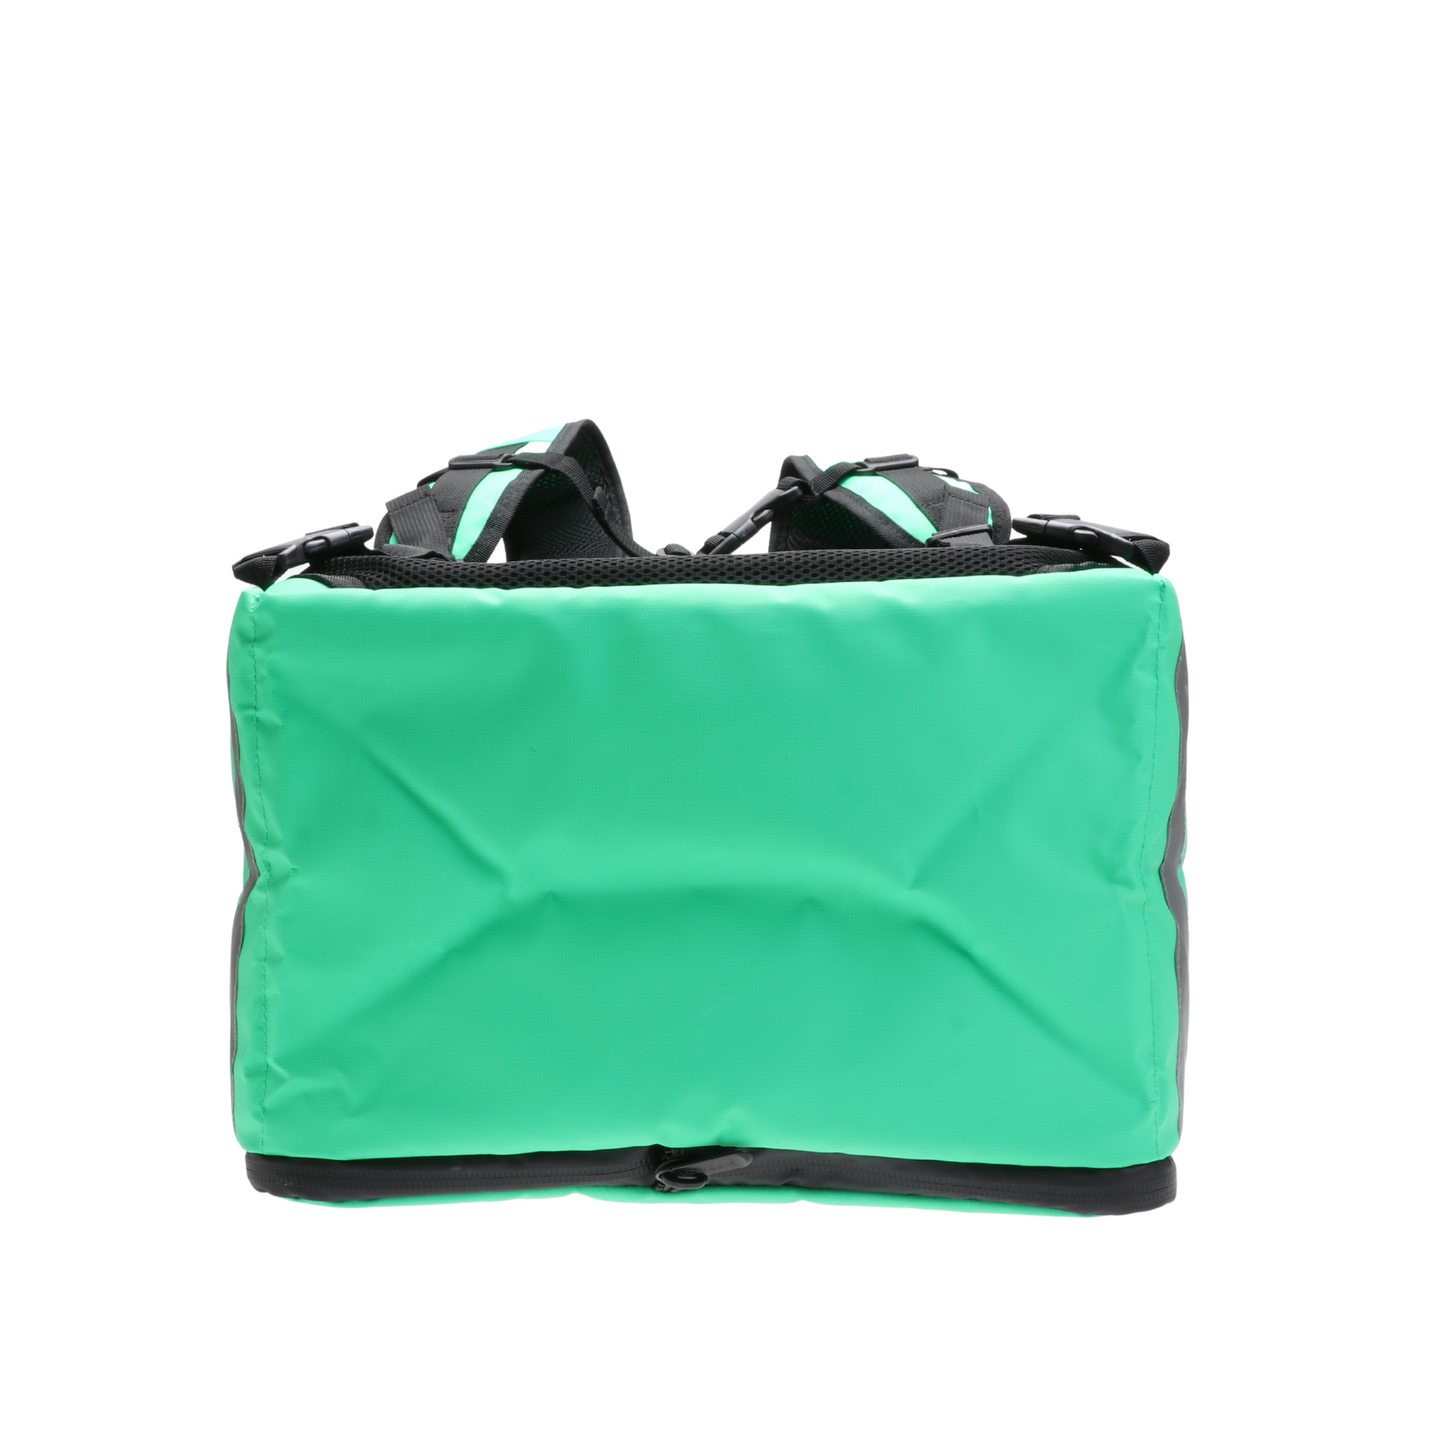 2-WAY Compact Delivery Bag